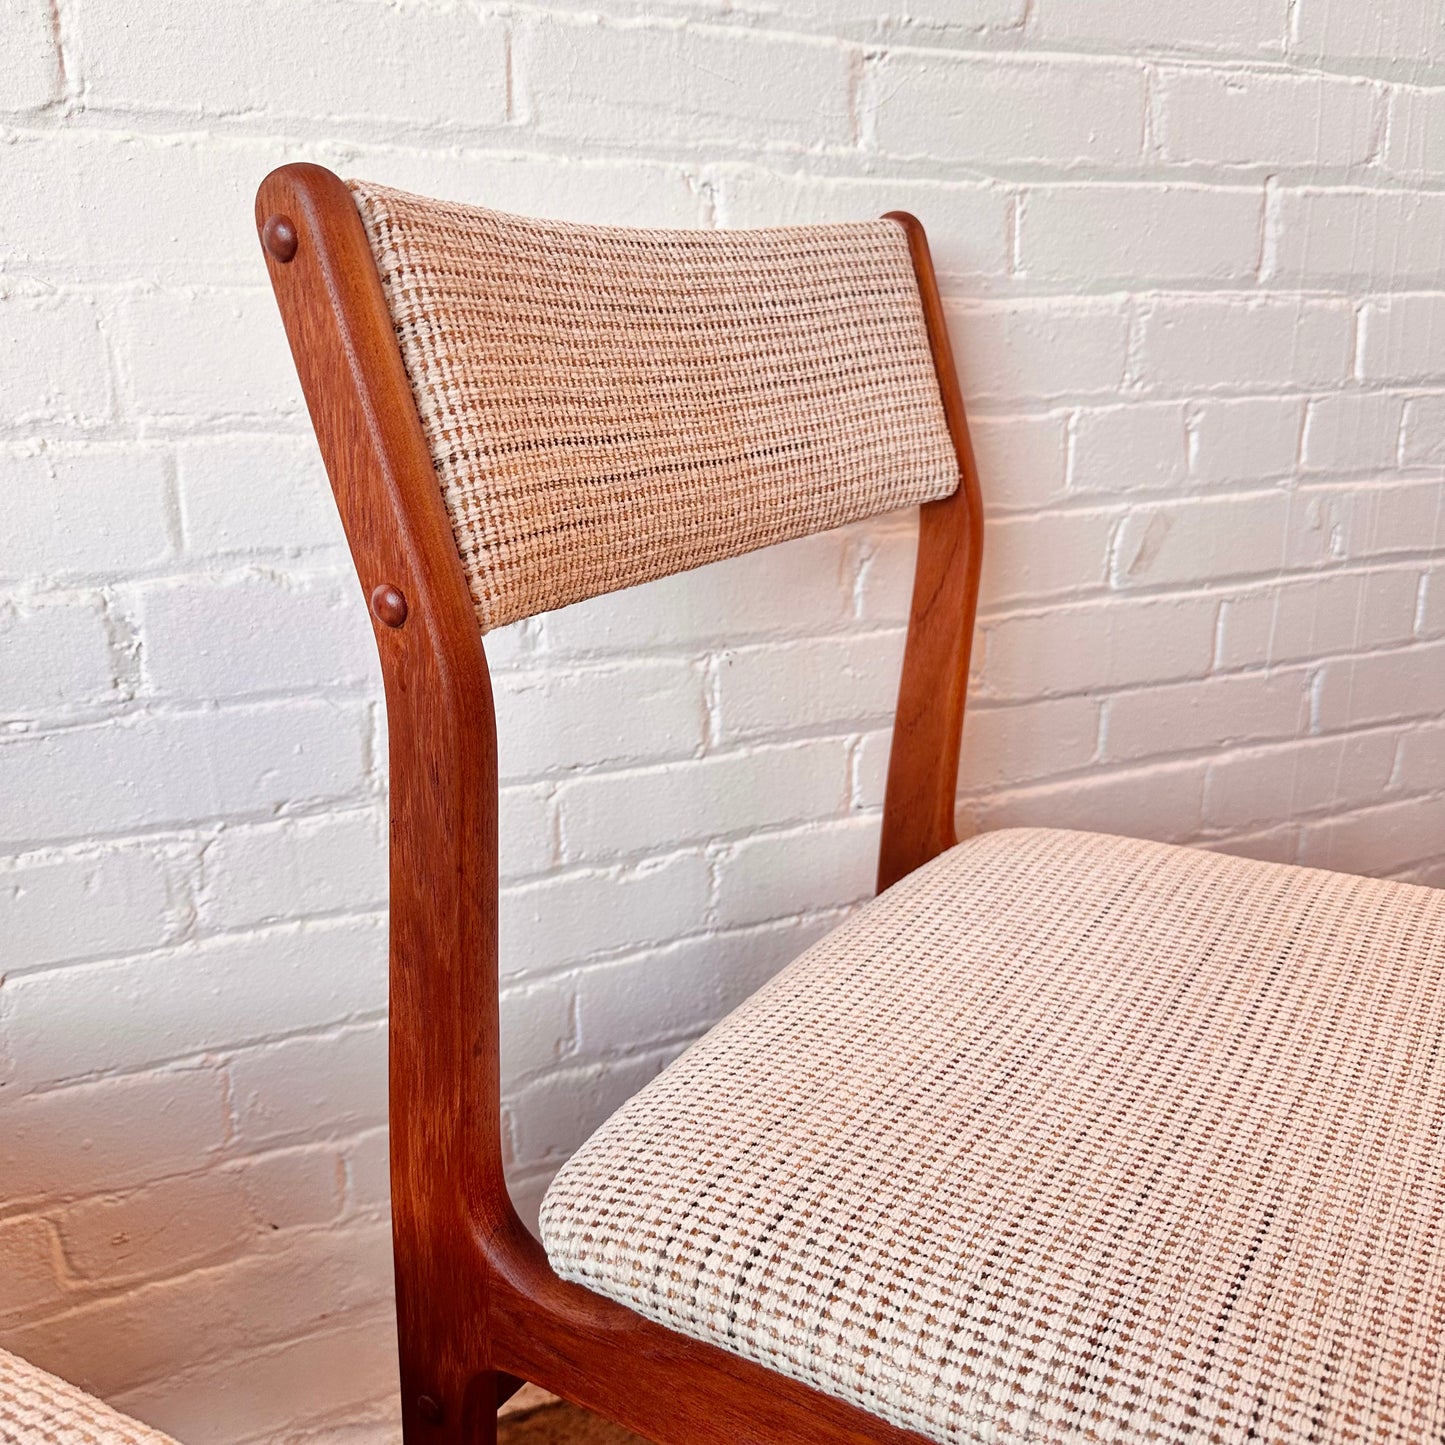 SET OF 4 VINTAGE DANISH MODERN TEAK DINING CHAIRS BY D-SCAN - REUPHOLSTERED AND RESTORED